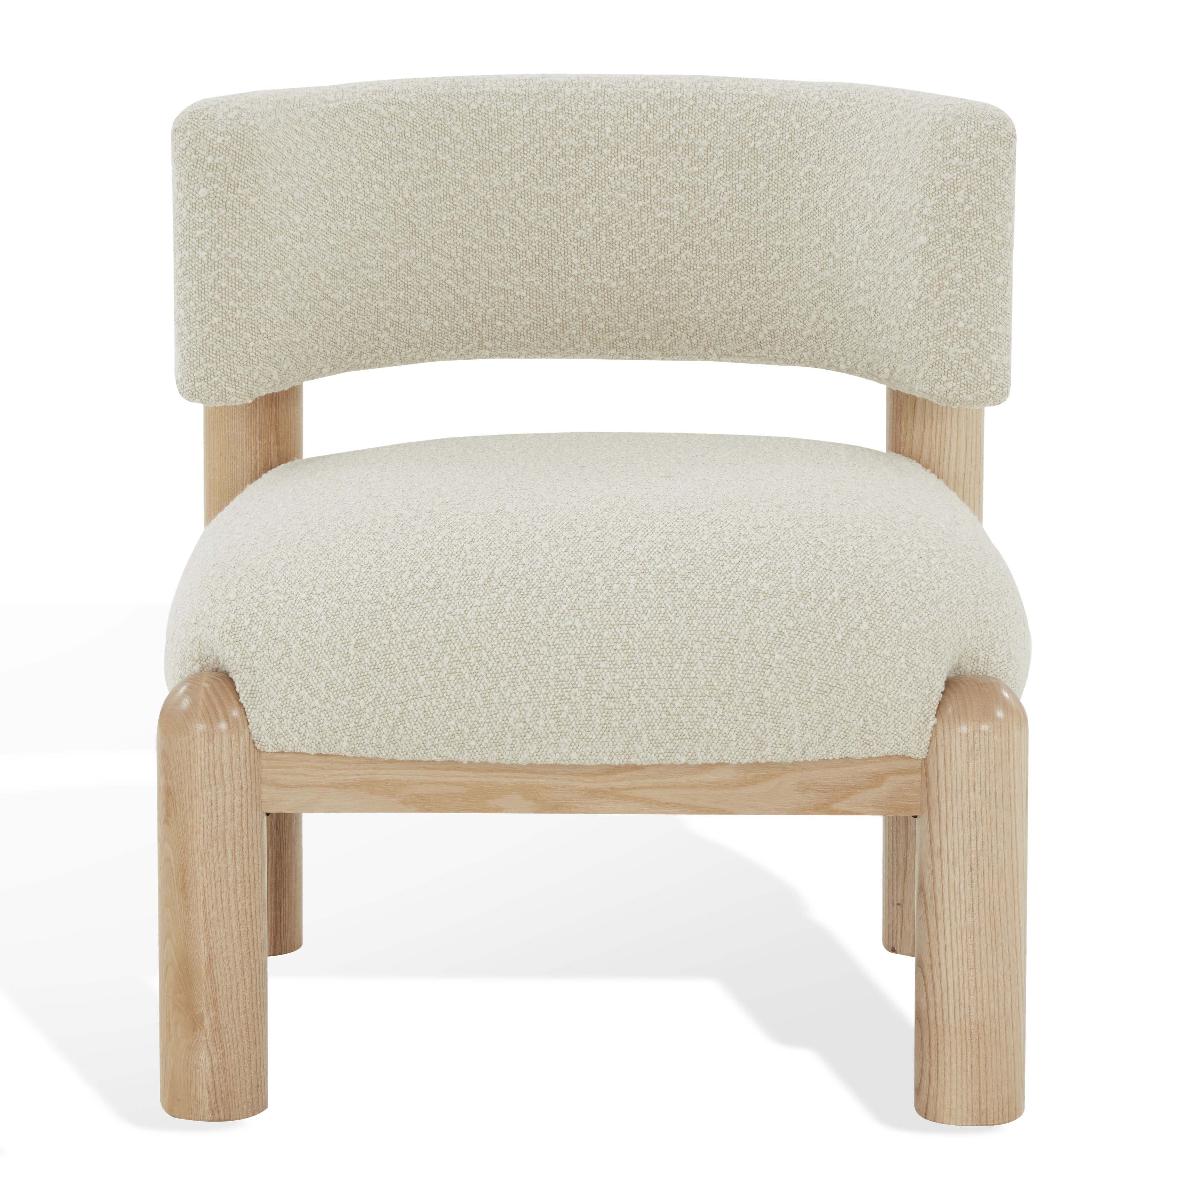 Safavieh Couture Rosabryna Faux Shearling Accent Chair - Cream / Natural